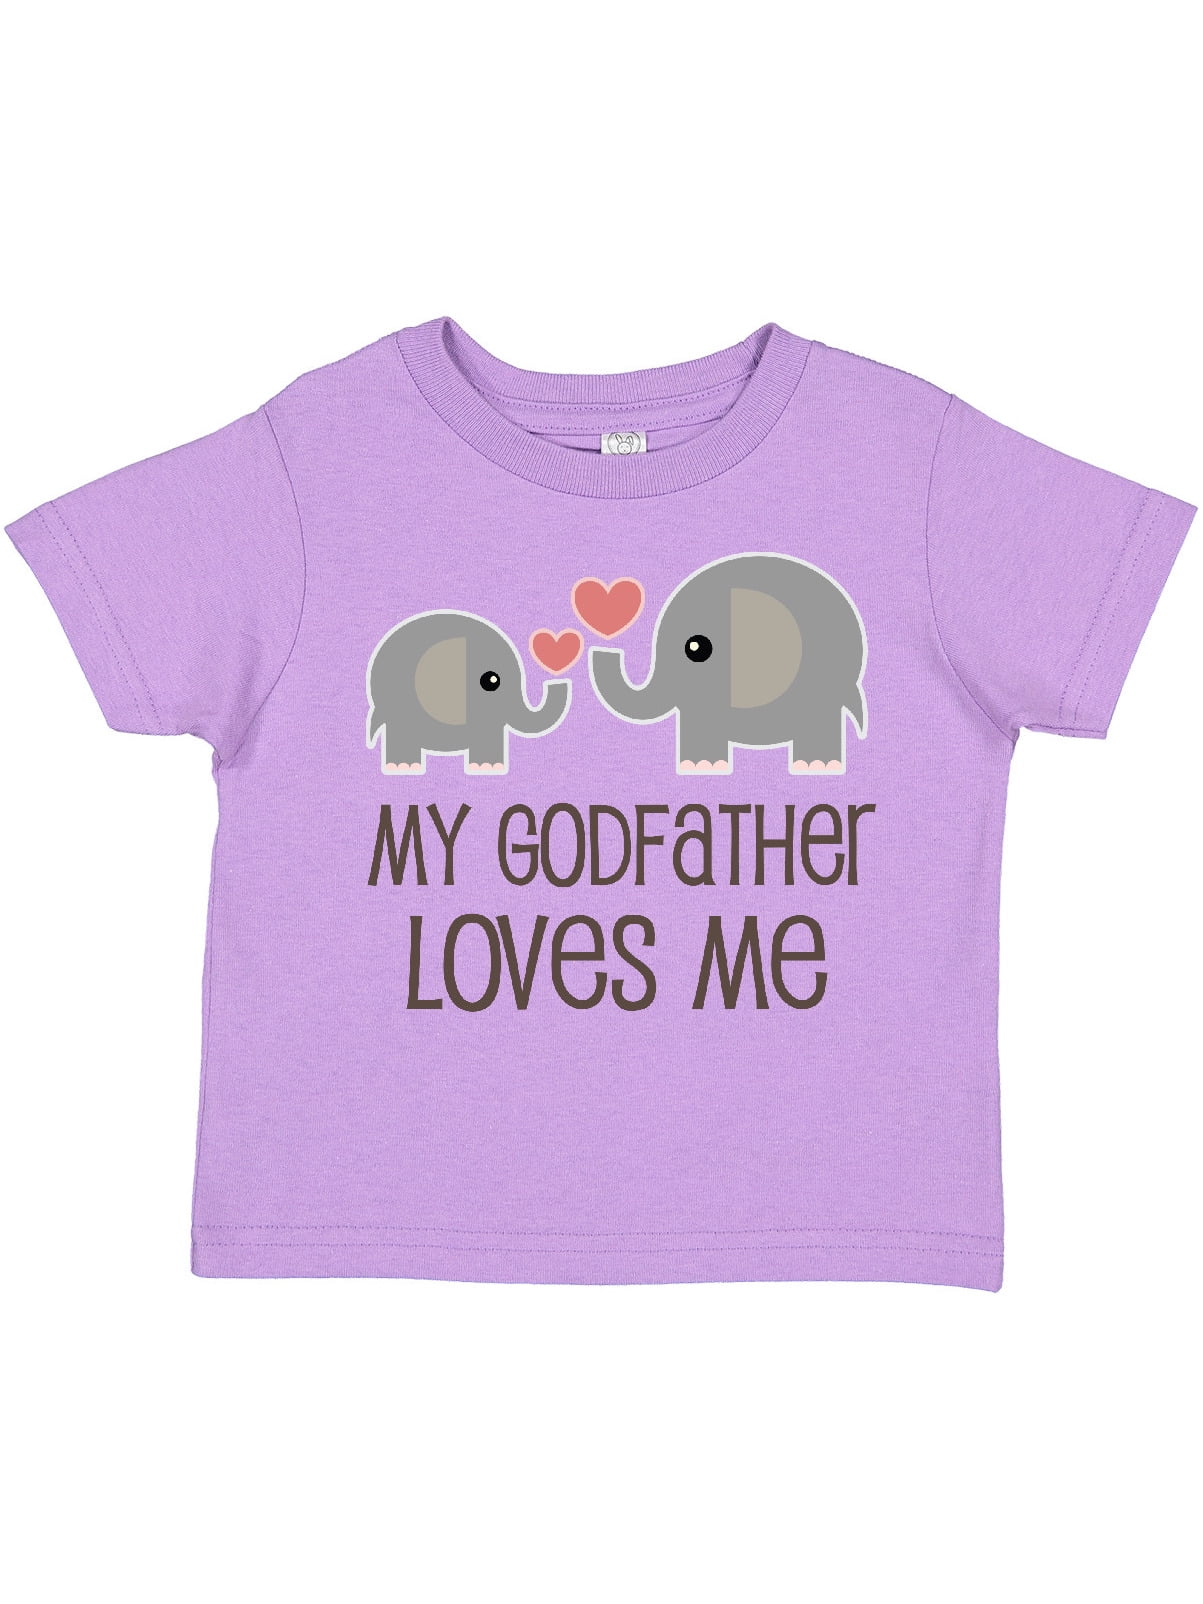 Toddler/Kids Ruffle T-Shirt Im Going On an Airplane with My Godfather Pack My Stuff 